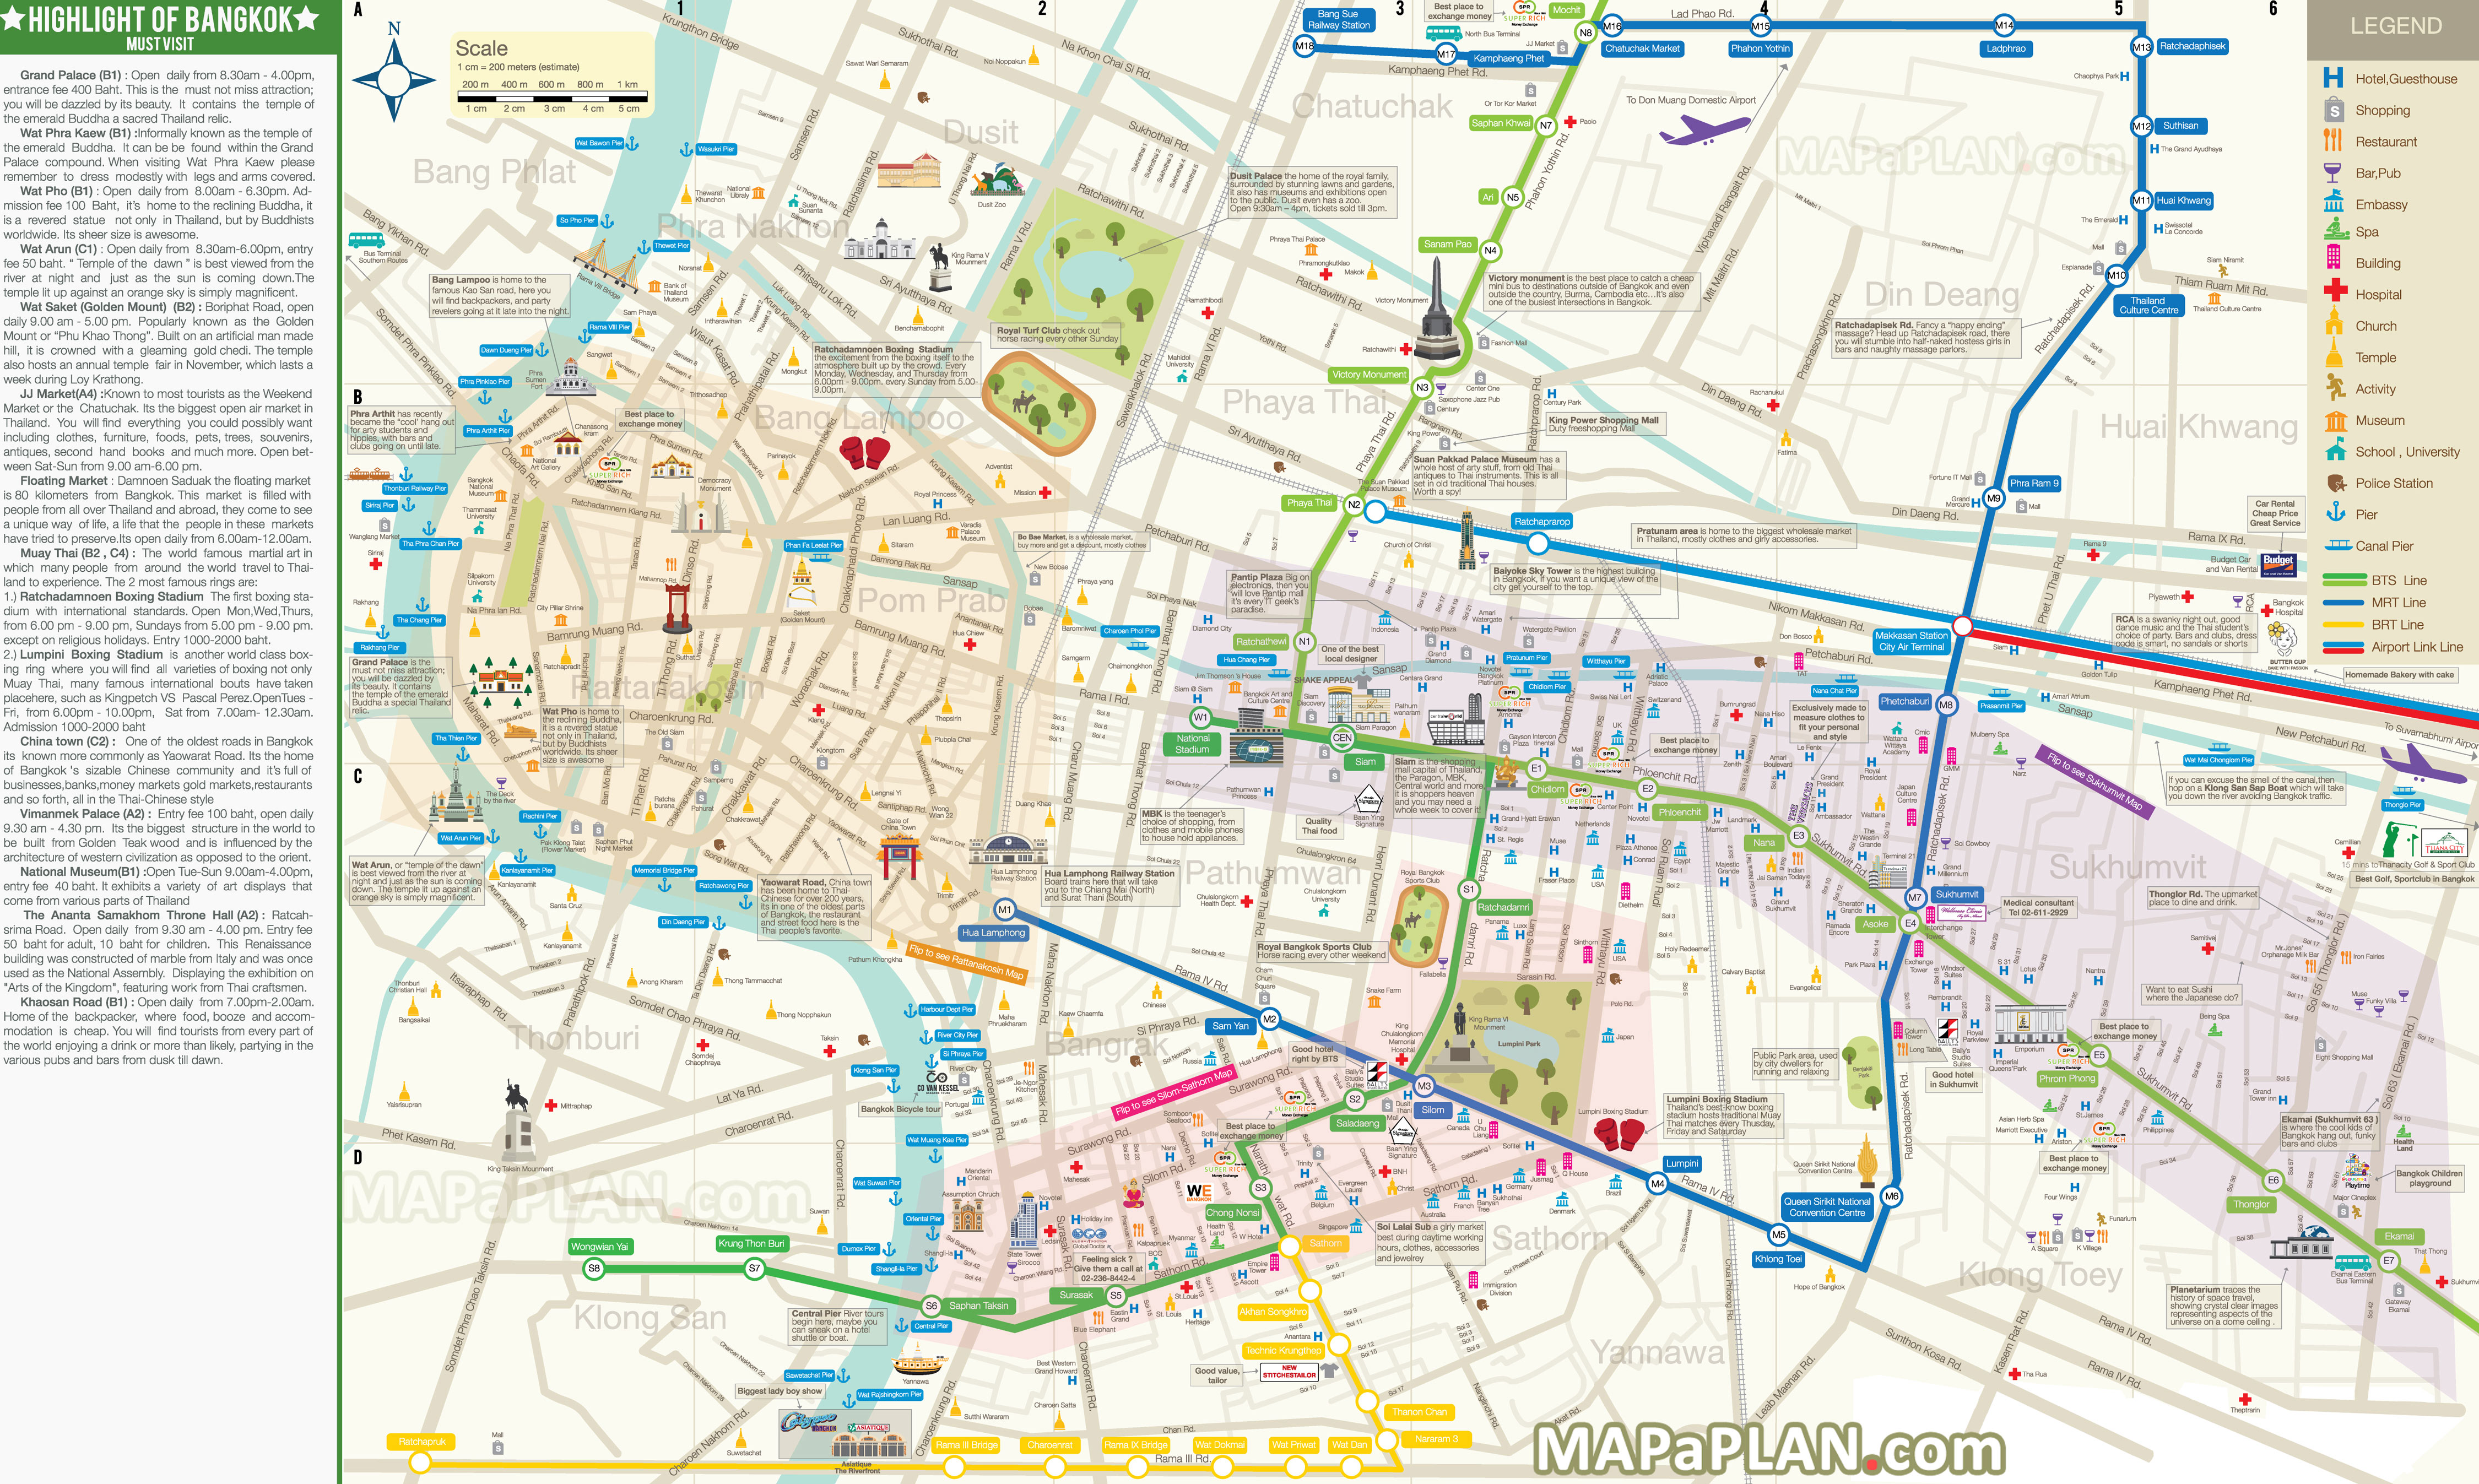 City centre top 10 must see places to visit including Sukhumvit Silom Sathorn Wat Pho Bangkok top tourist attractions map